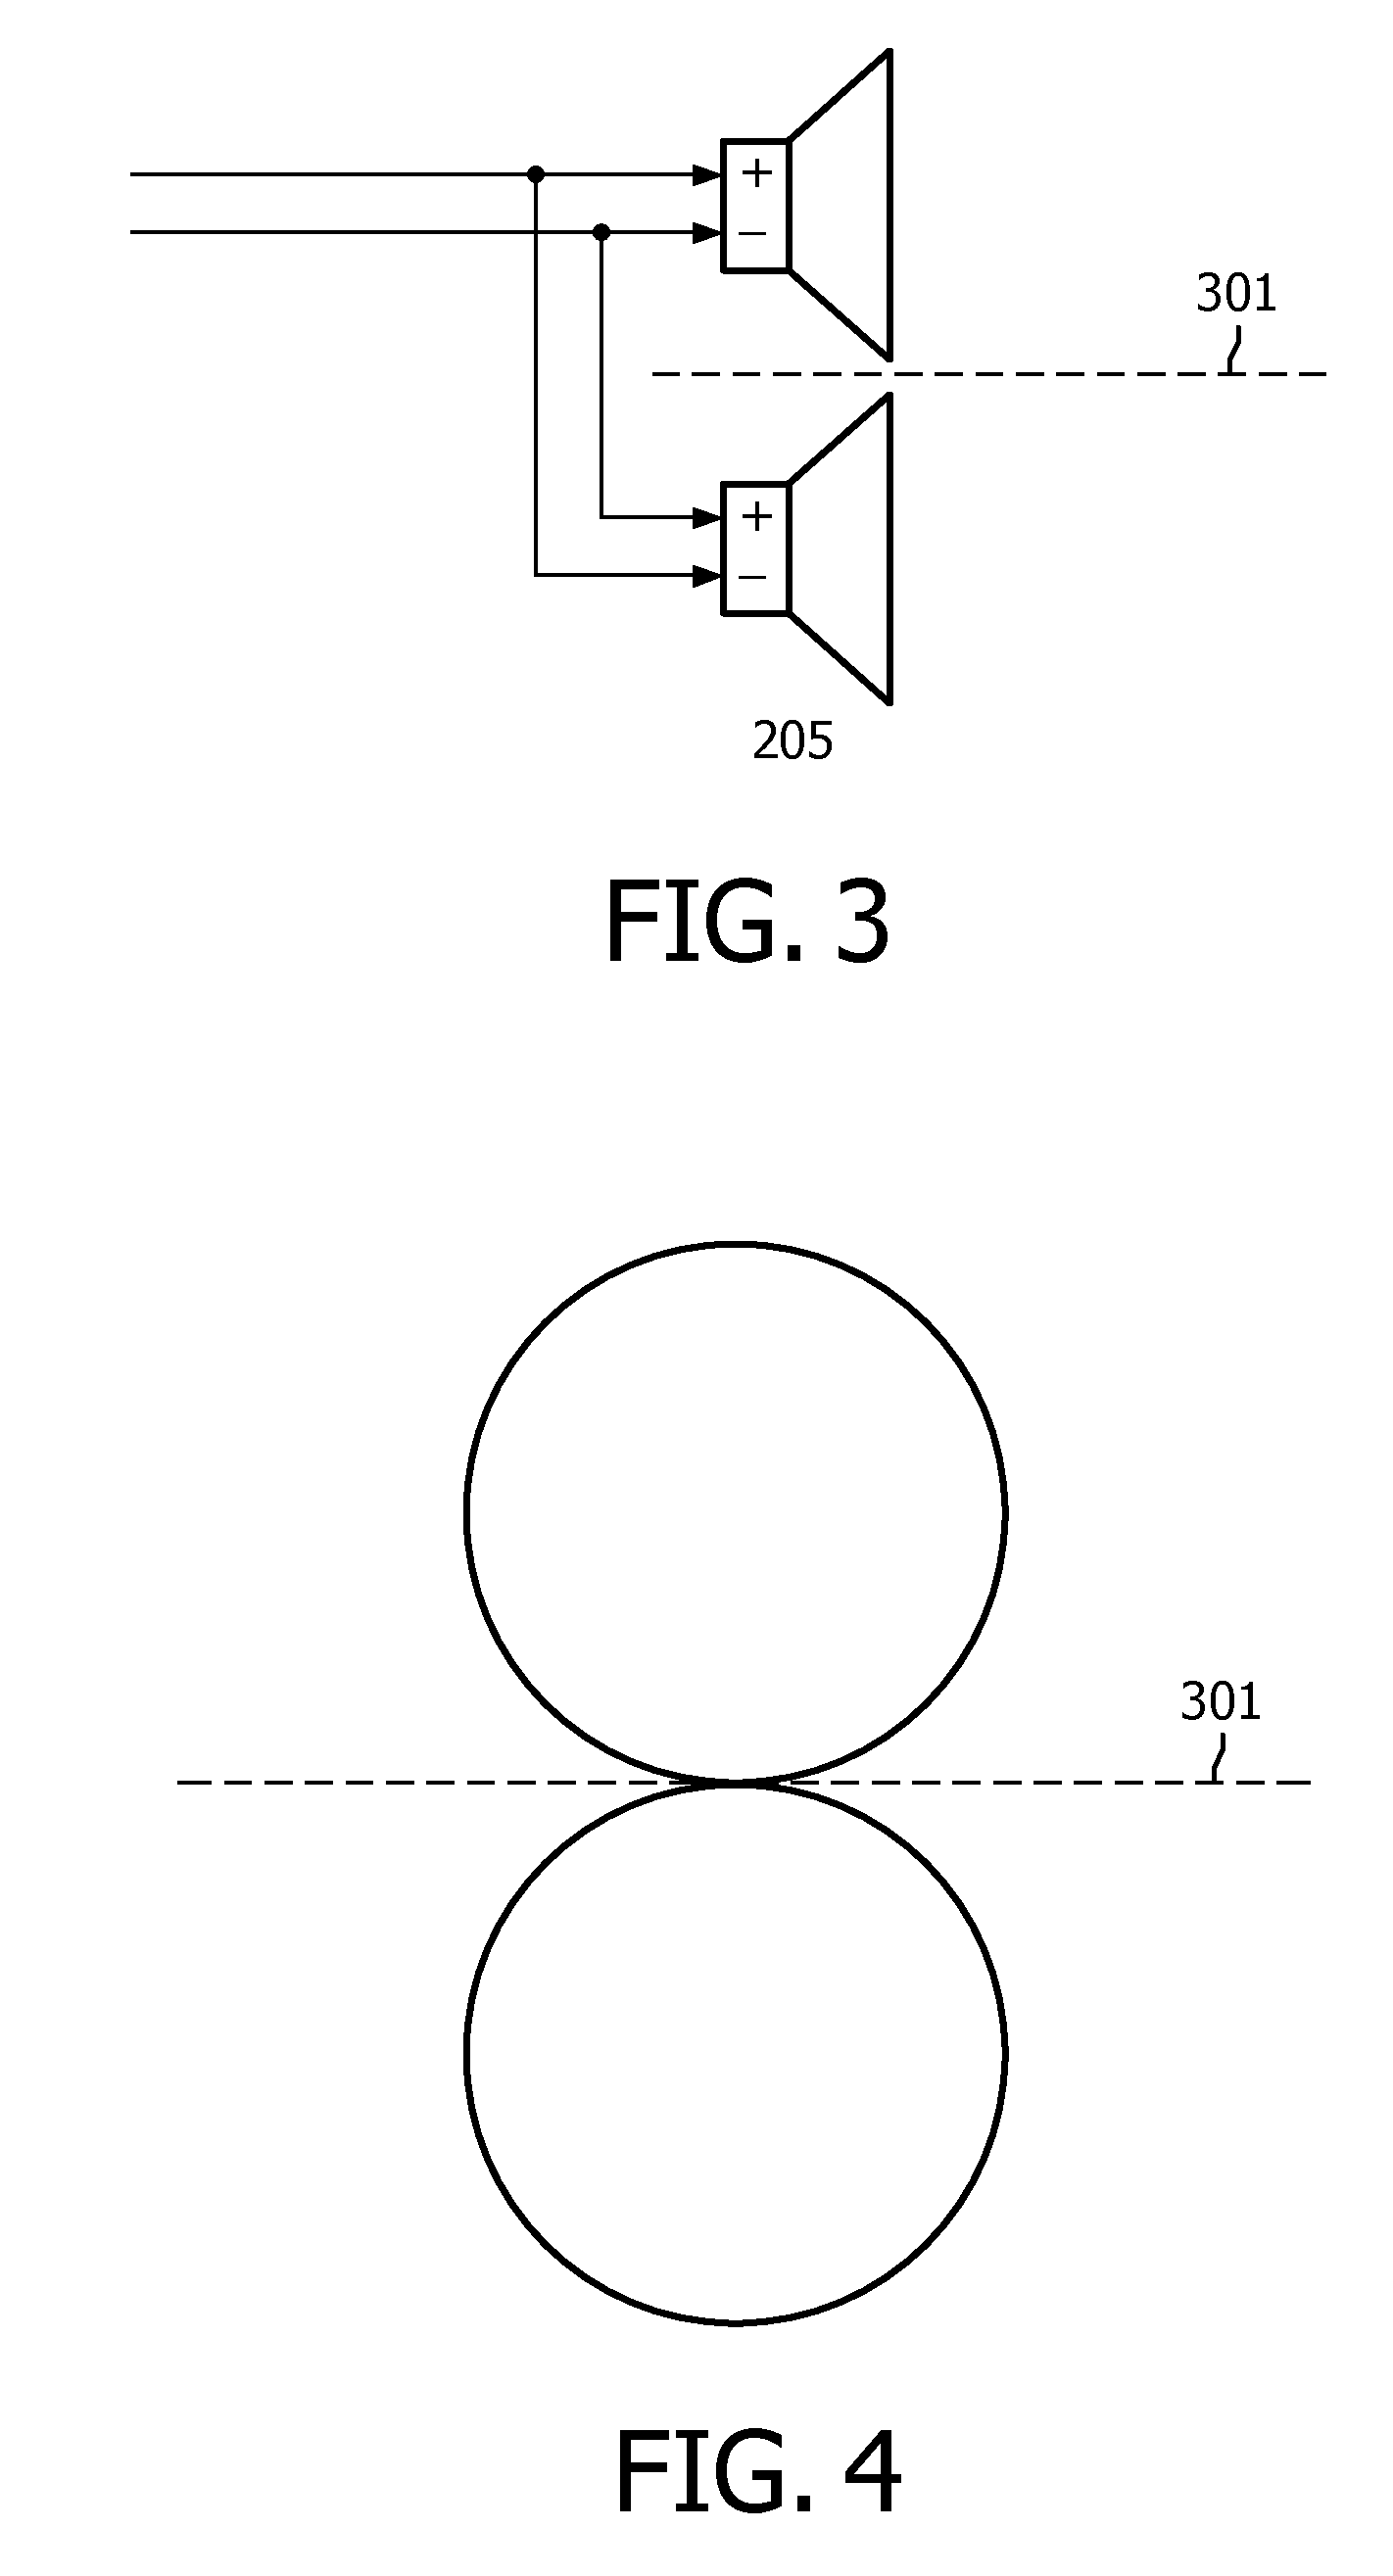 Speaker system and method of operation therefor